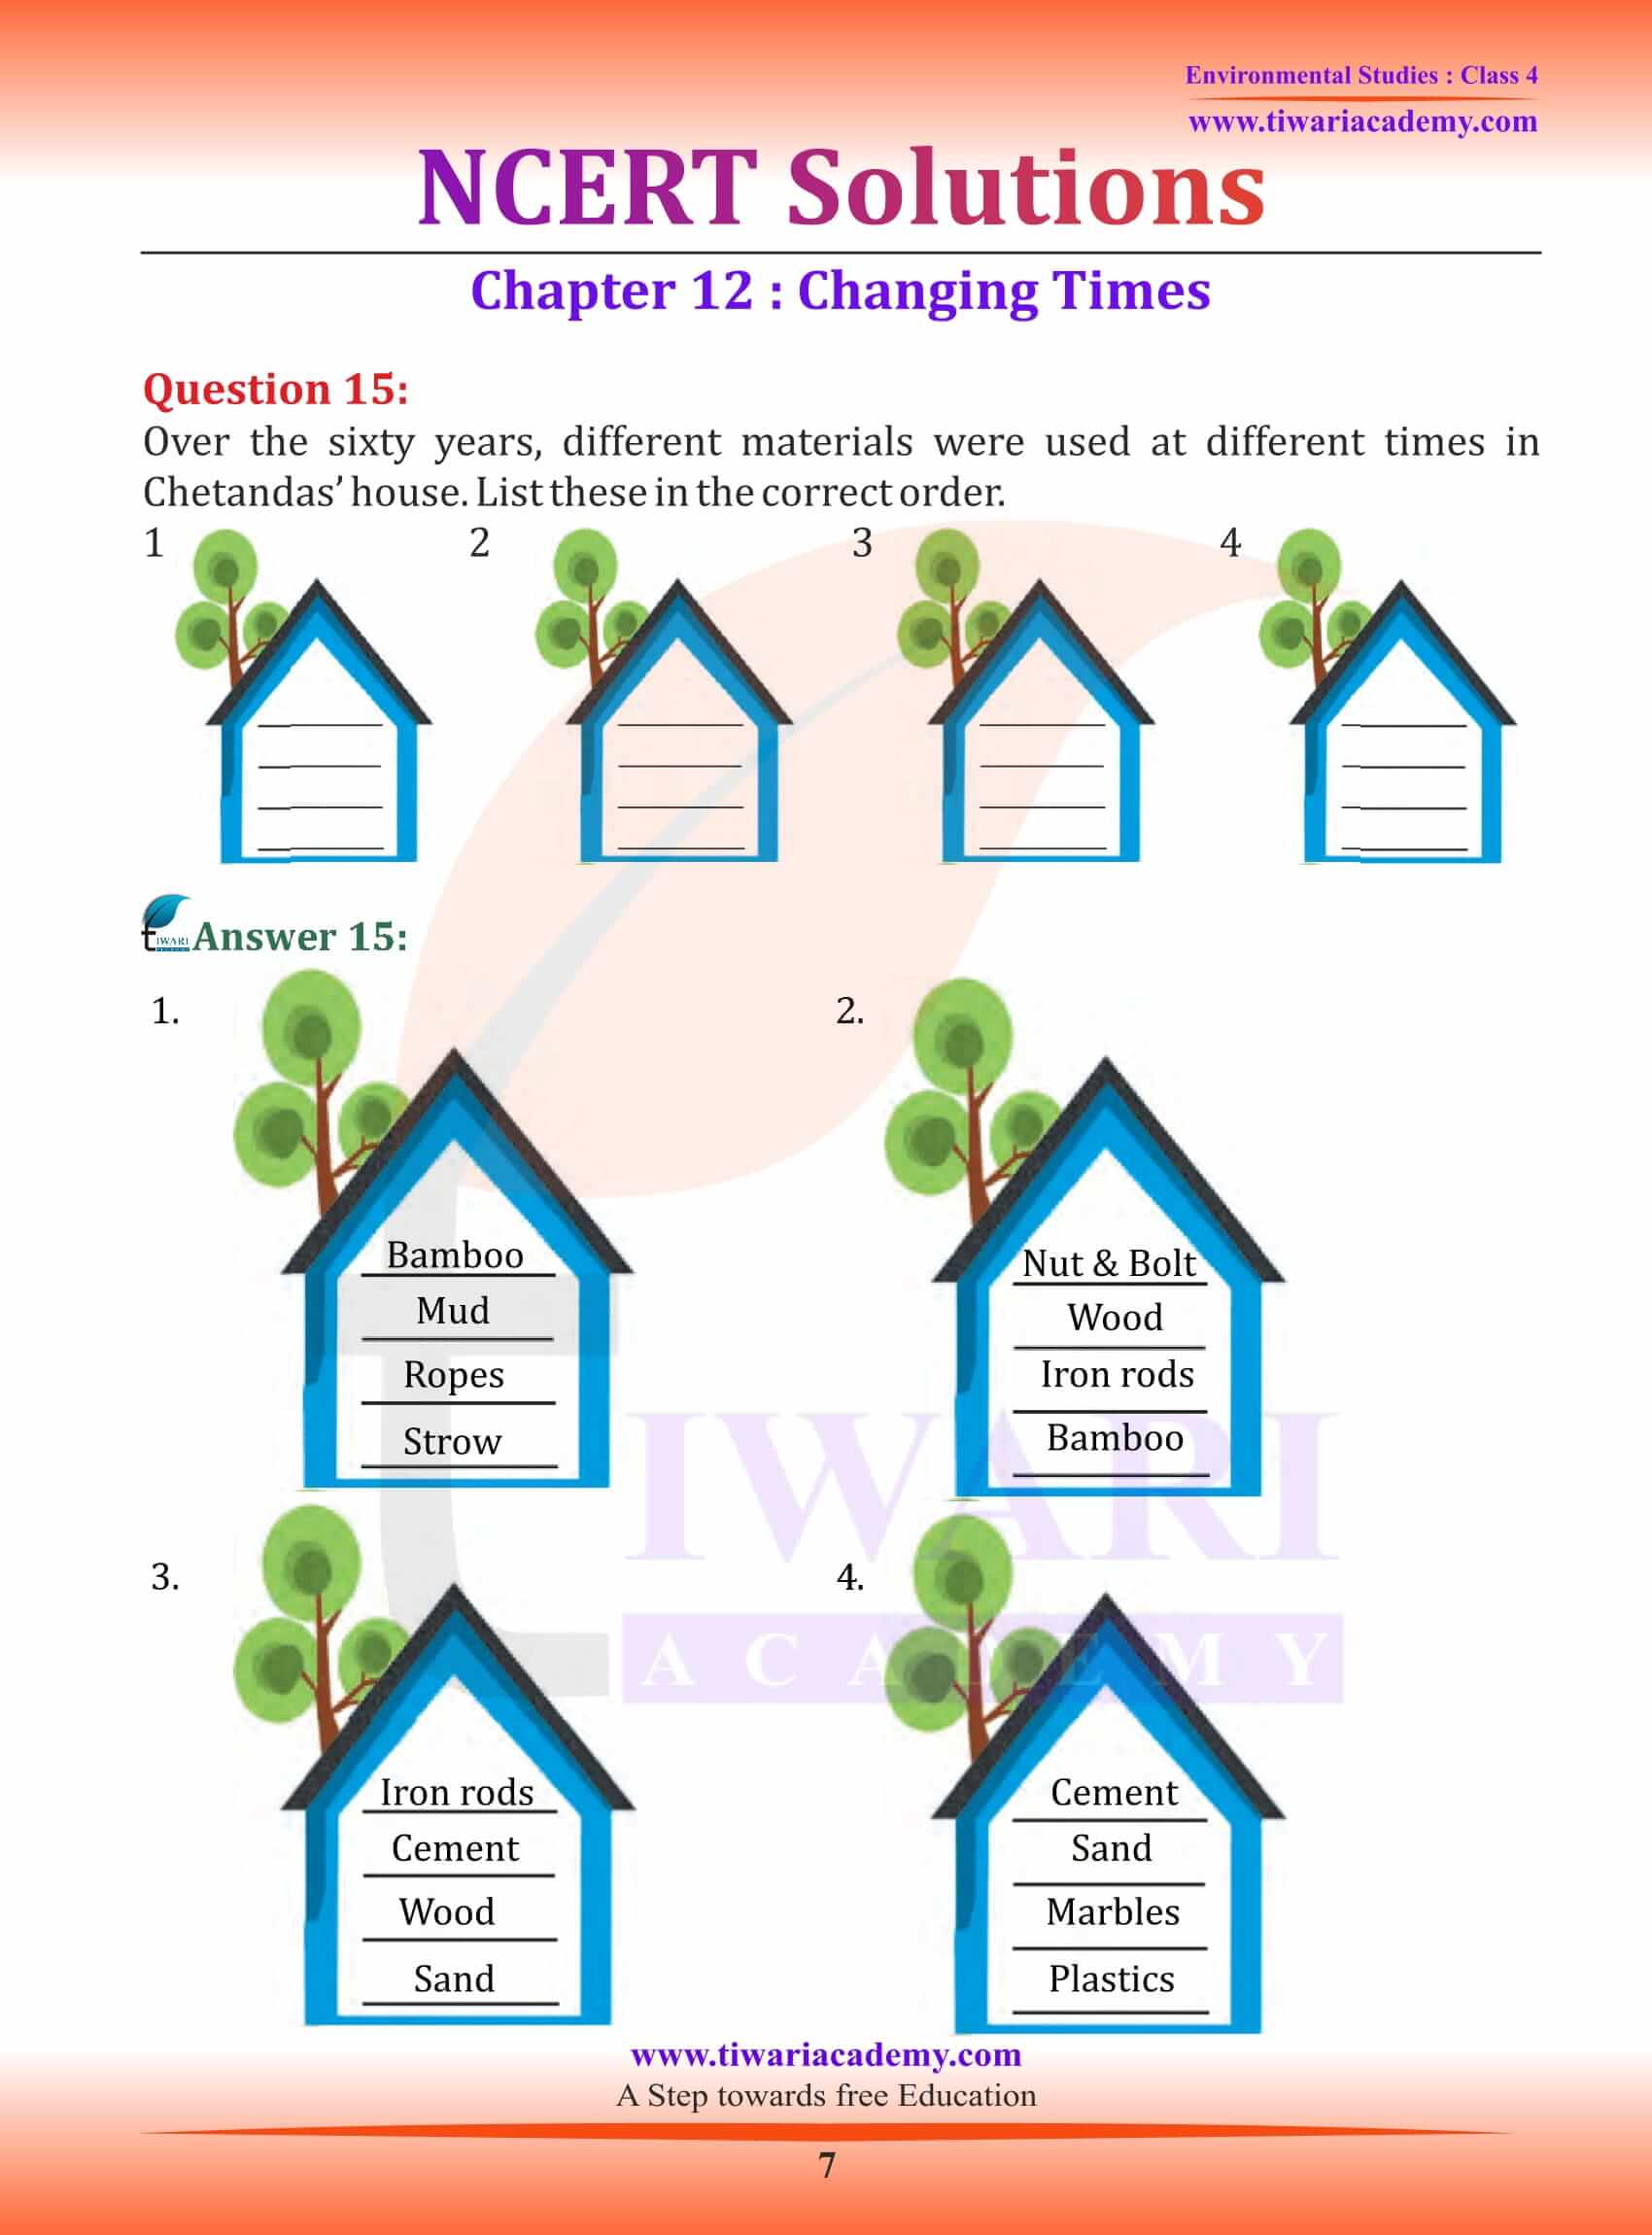 NCERT Solutions for Class 4 EVS Chapter 12 guide